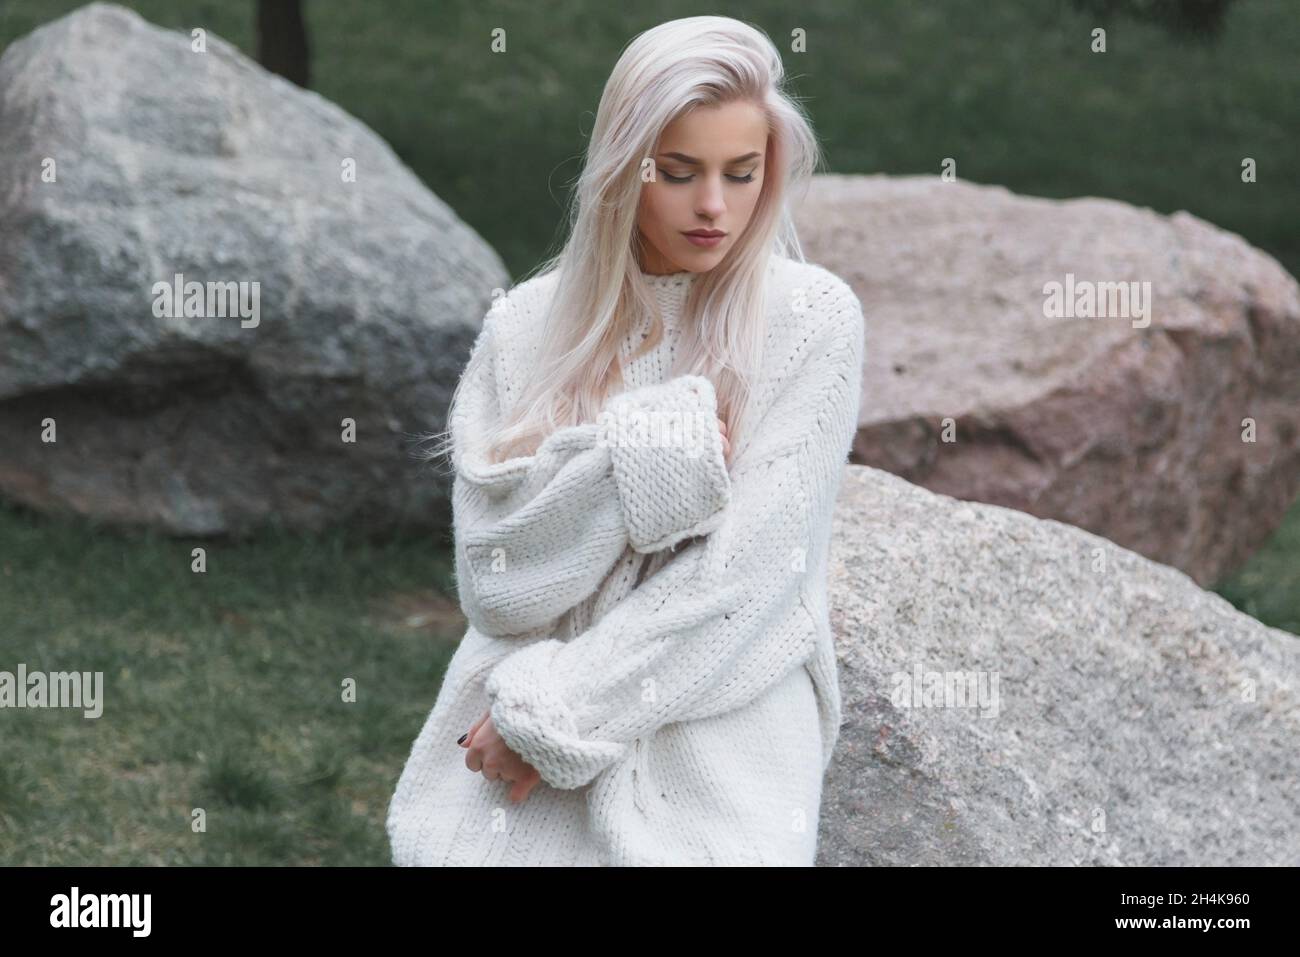 Blonde Hair beautiful female wearing in knitted white sweater. Stock Photo